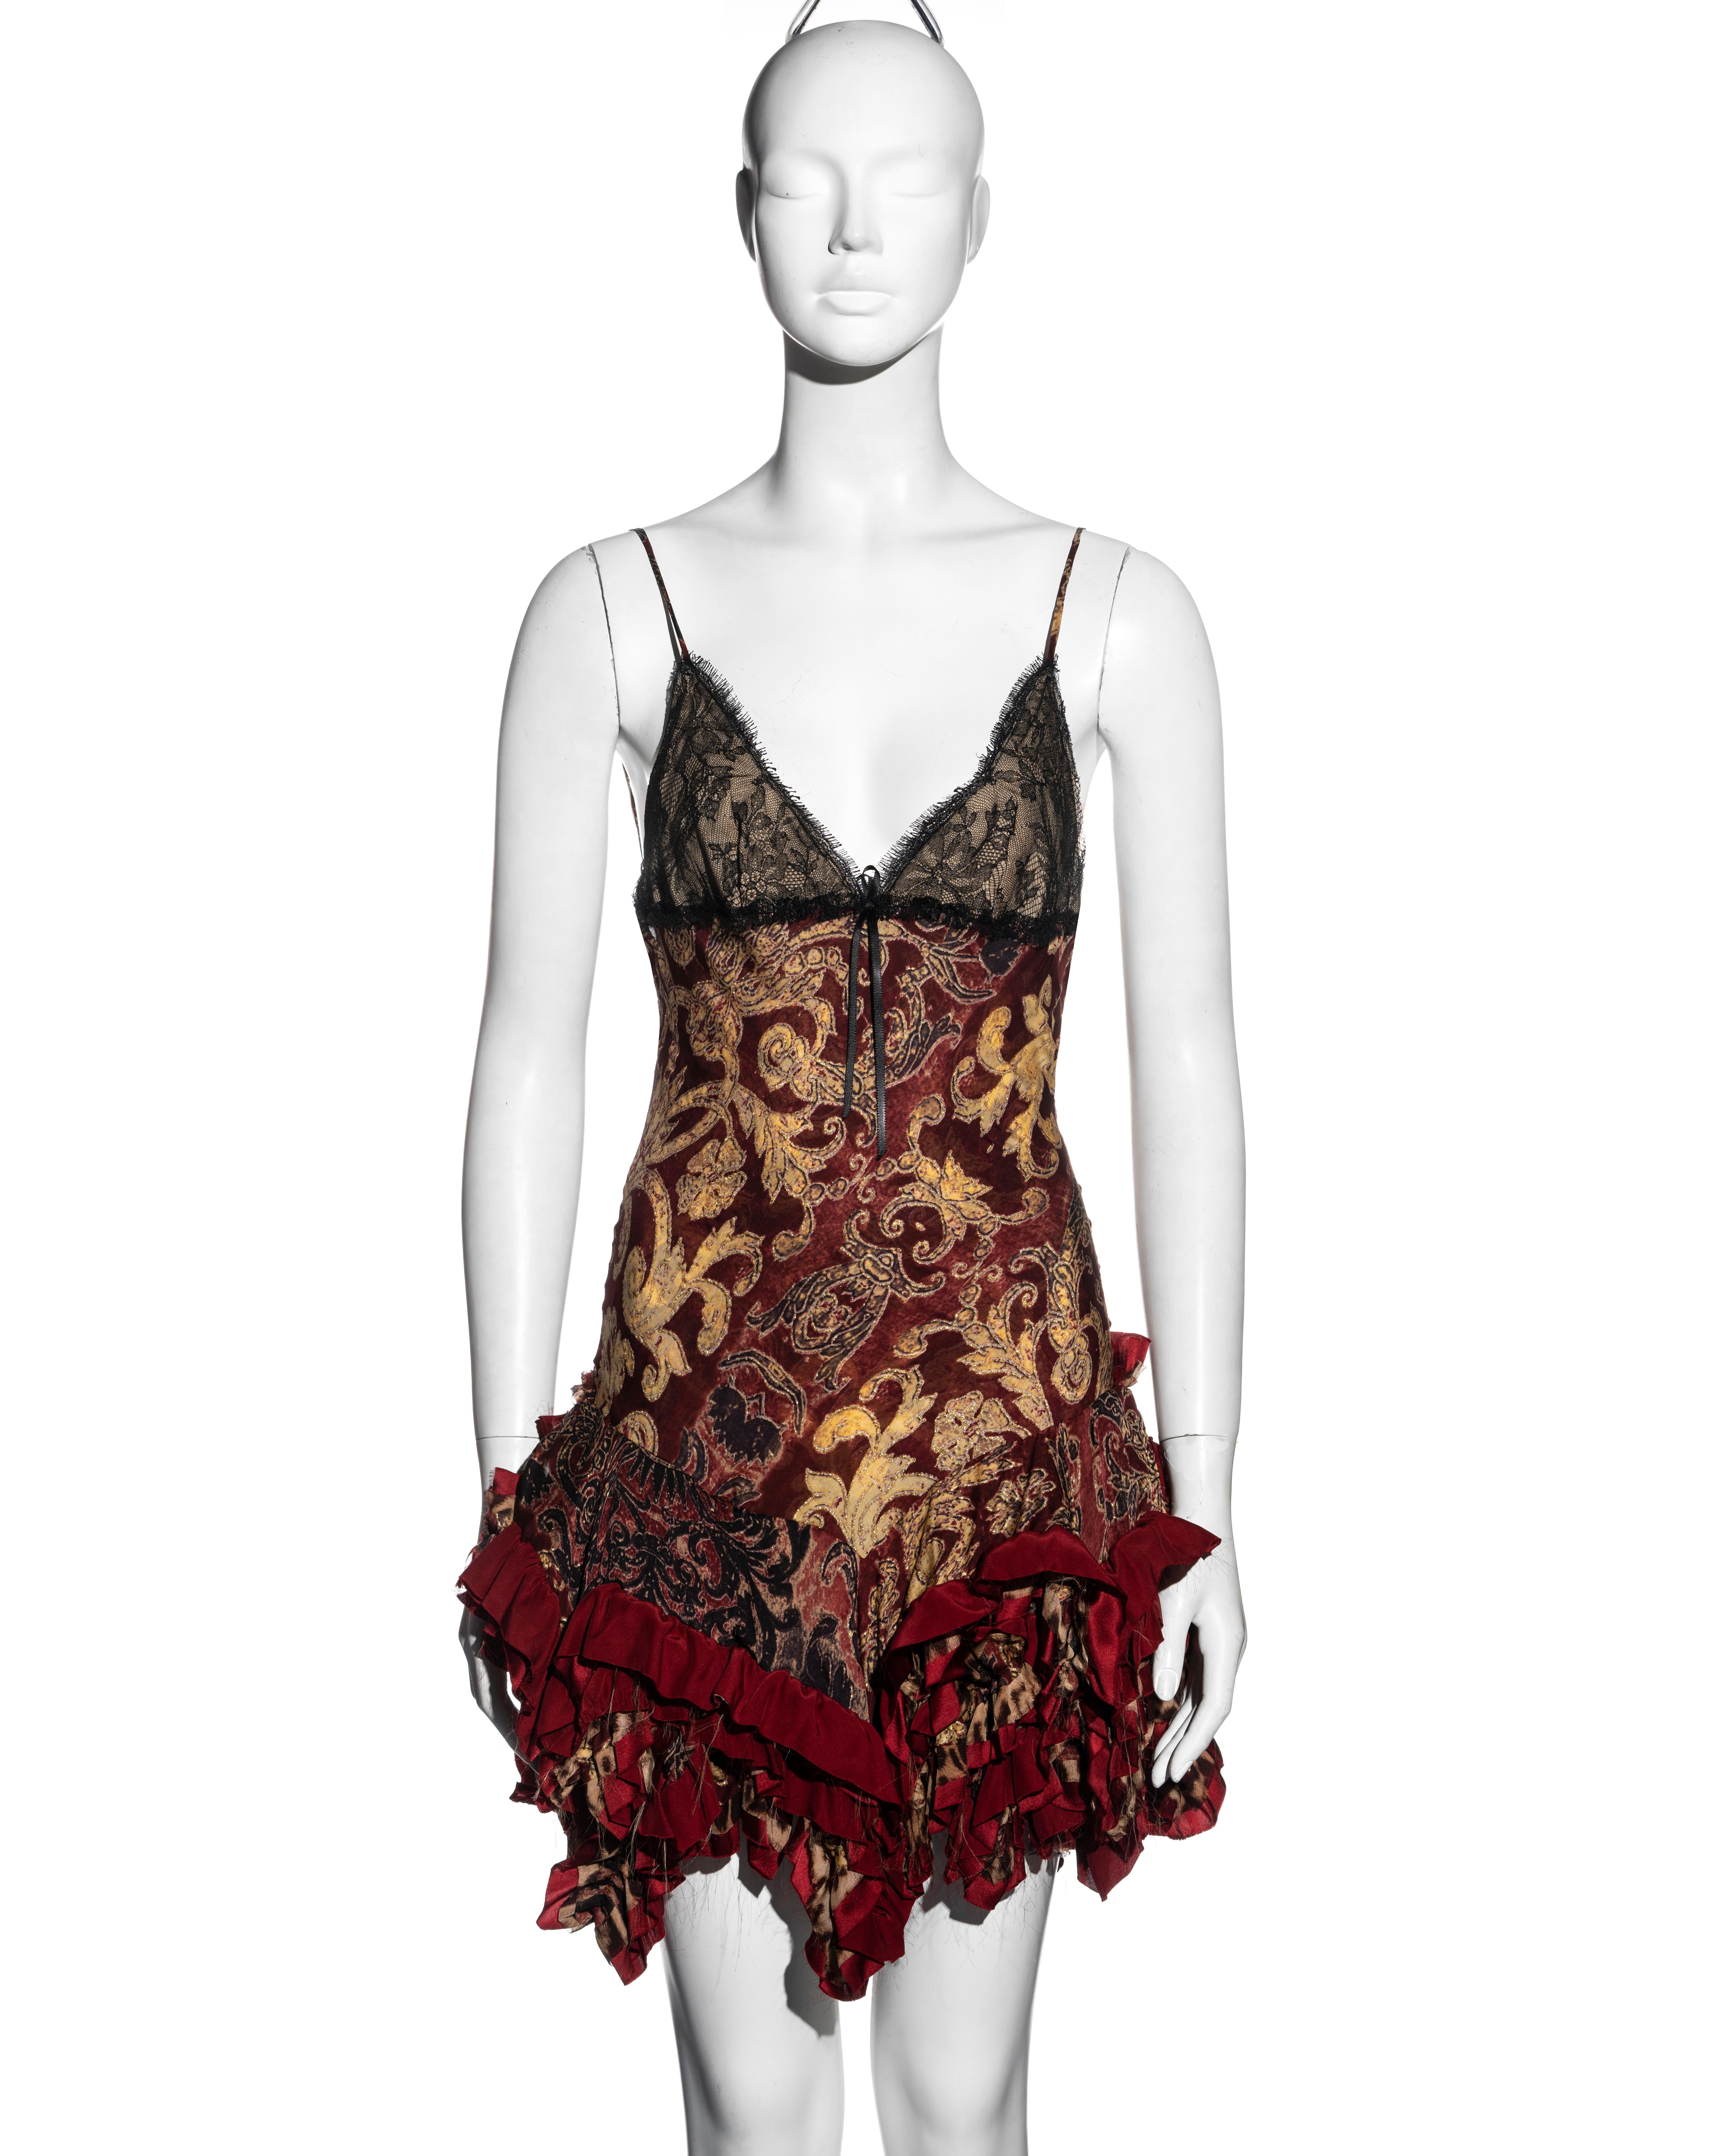 ▪ Roberto Cavalli evening slip dress 
▪ Red and gold brocade-print silk 
▪ Black lace overlay on the breasts with raw edges 
▪ Spaghetti straps 
▪ Silk ribbon bow detail 
▪ Full ruffled mini skirt with an asymmetric frayed hemline 
▪ Size Small
▪